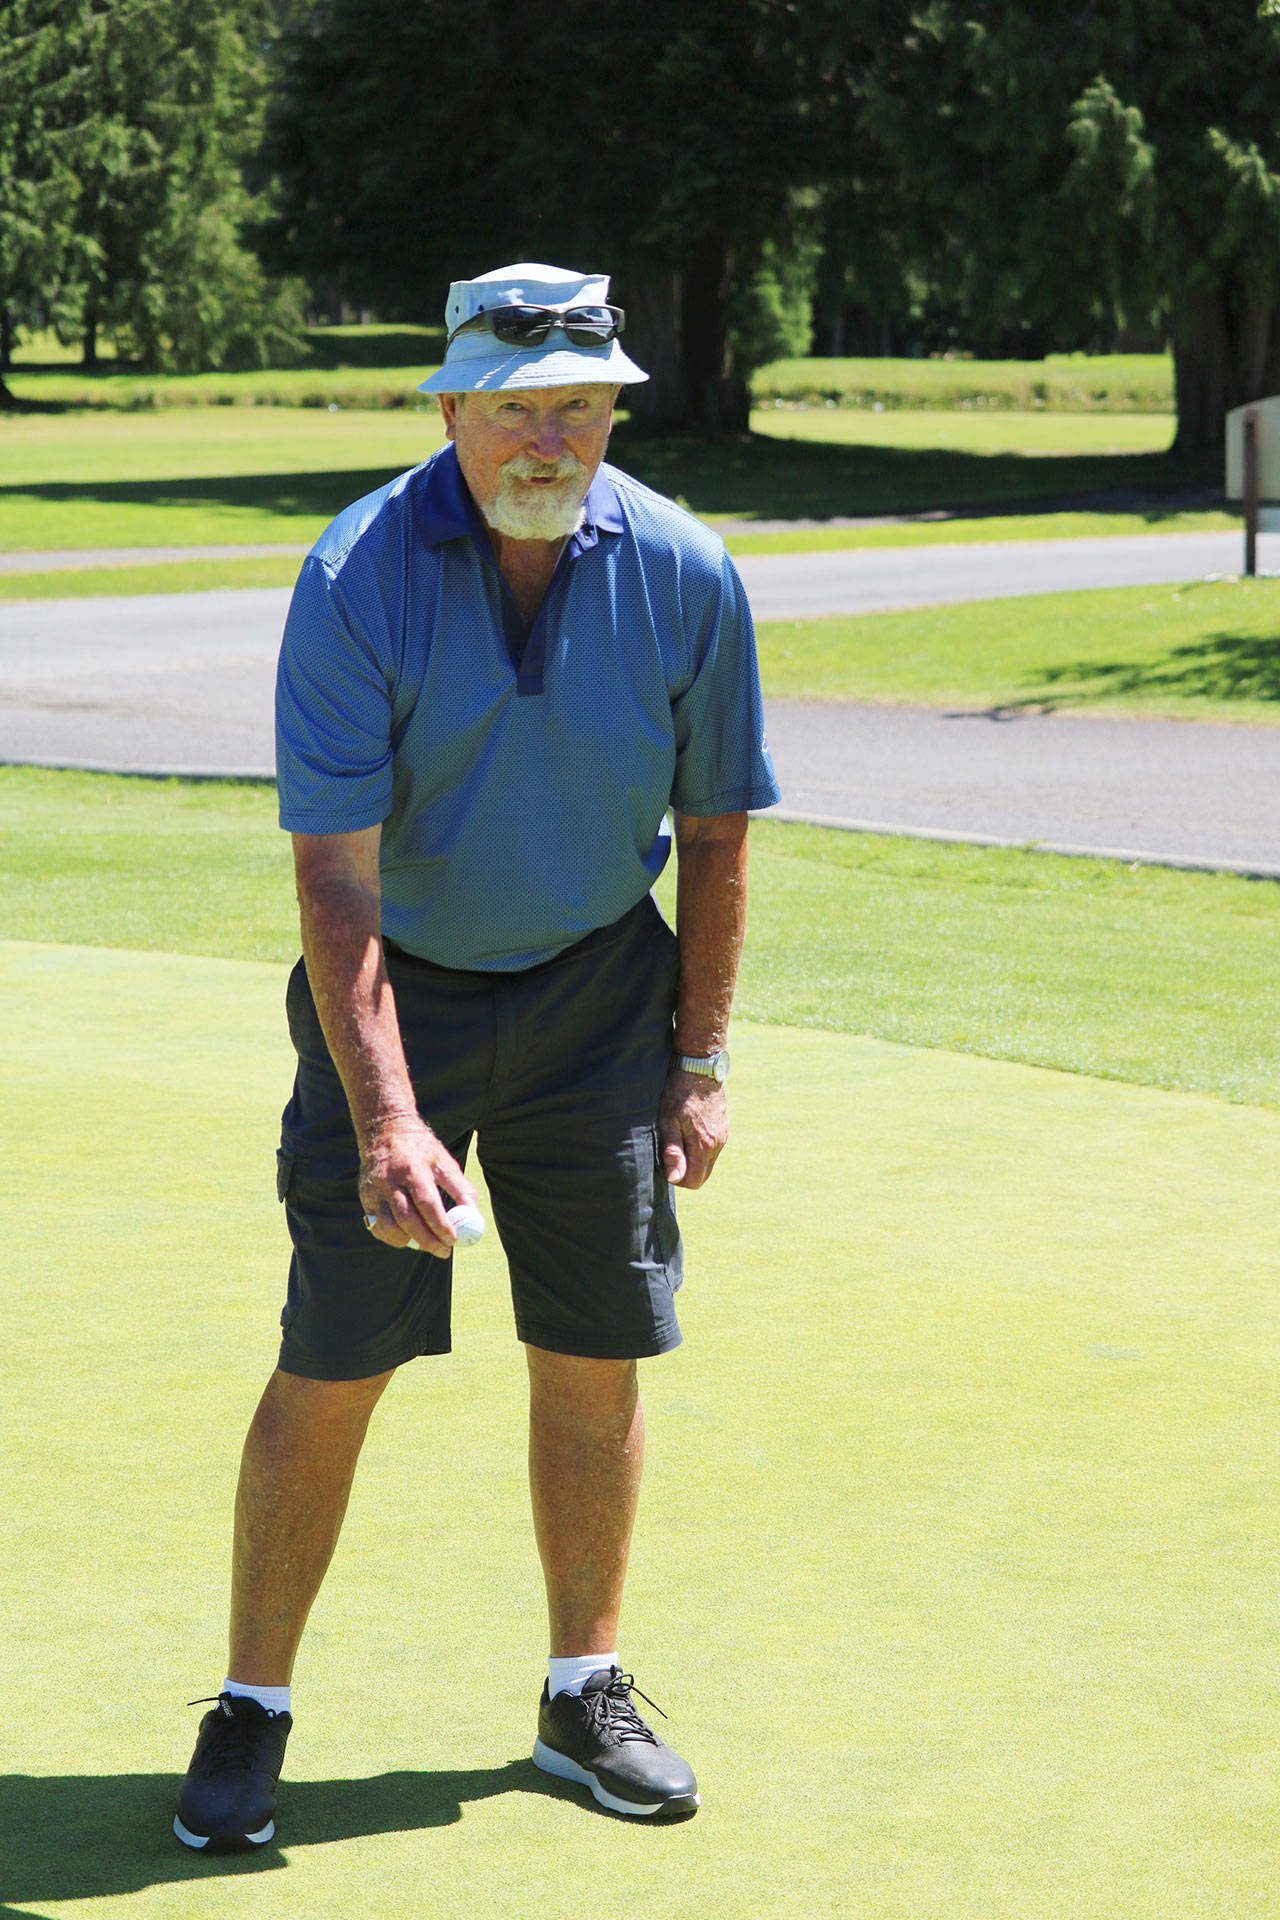 Frank Herodes celebrates a hole-in-one at Sunland Golf & Country Club’s fifth hole on July 15. Submitted photo